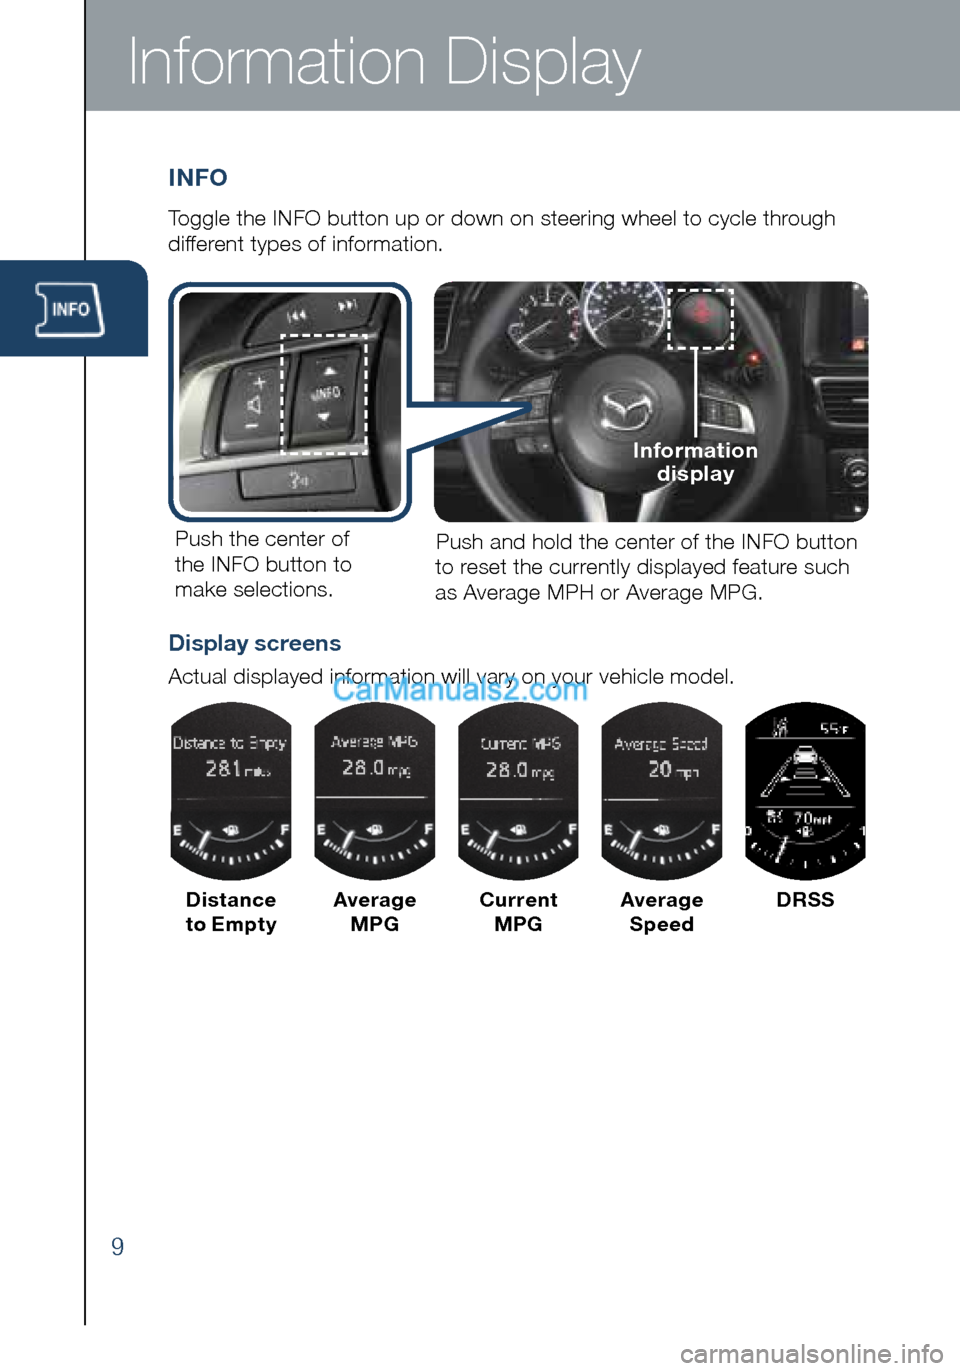 MAZDA MODEL CX-5 2016  Smart Start Guide (in English) 9
Information Display
INFO
Toggle the INFO button up or down on steering wheel to cycle through 
different types of information.Push the center of 
the INFO button to  make selections. Push and hold t